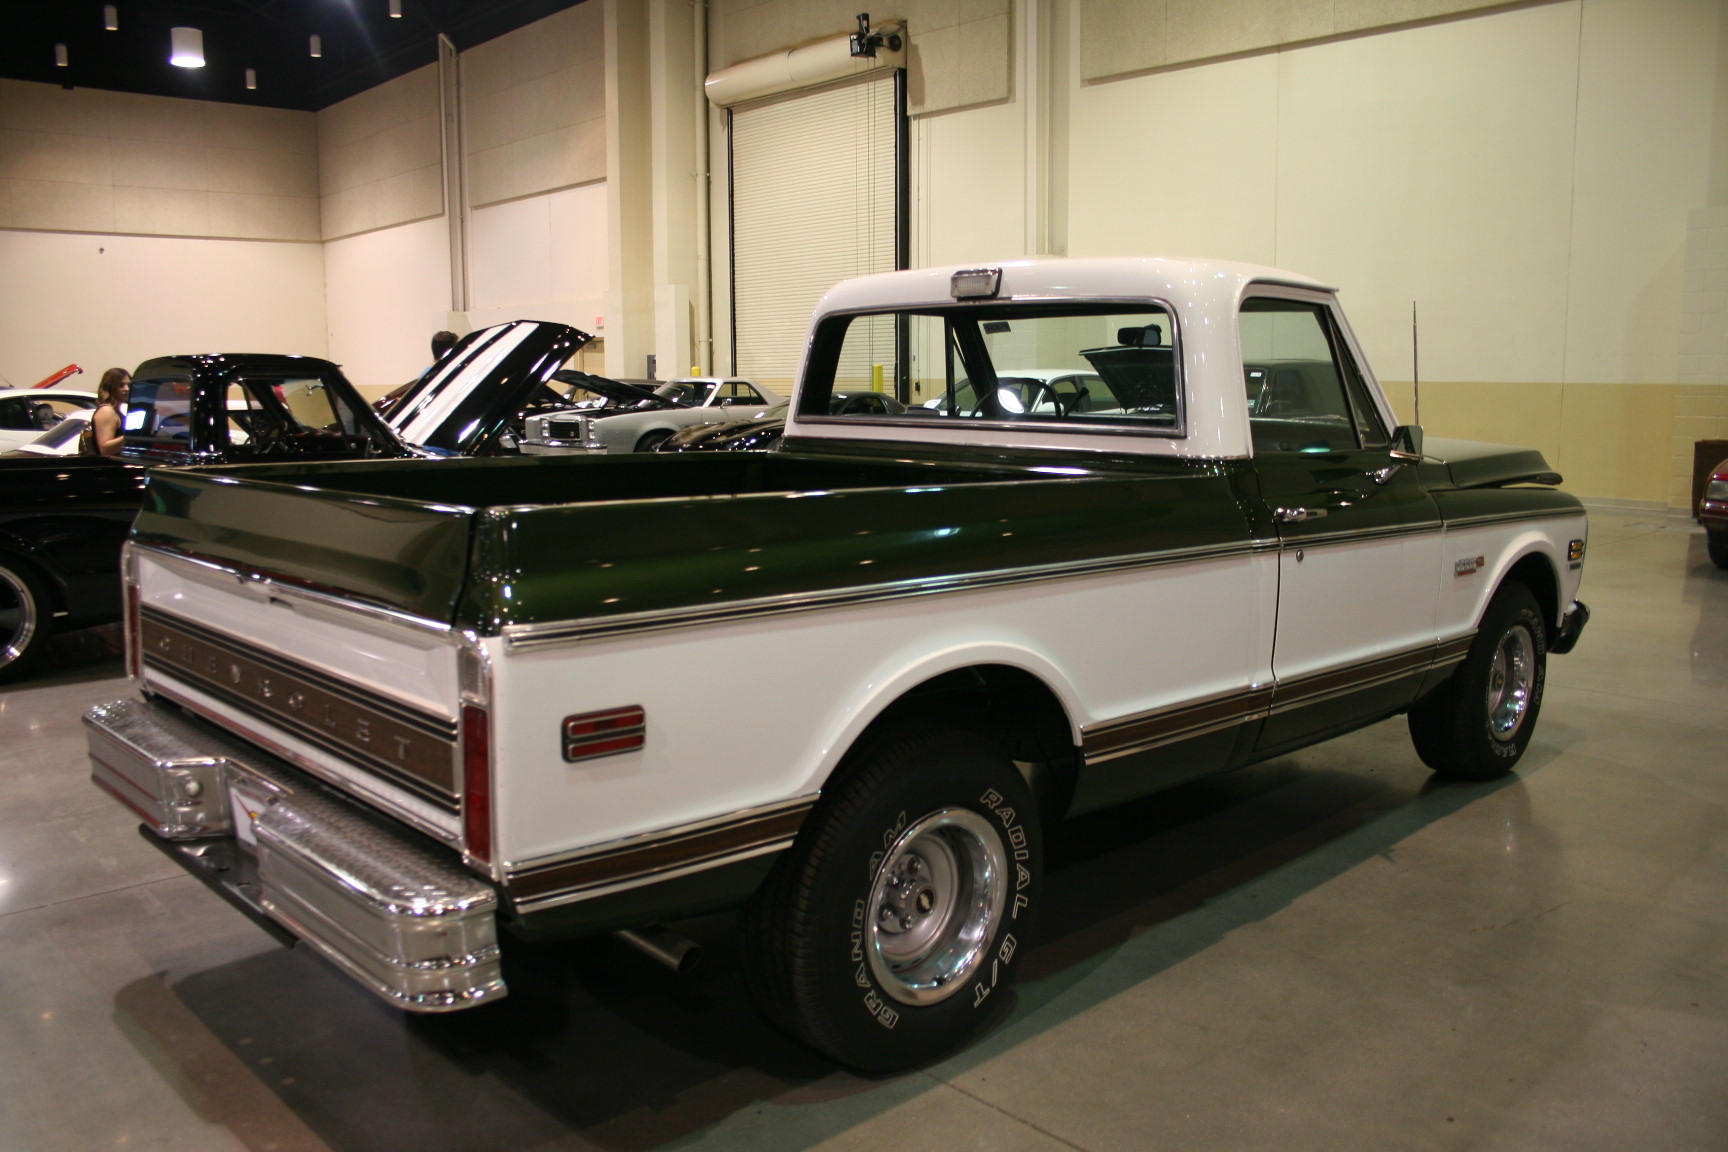 7th Image of a 1972 CHEVROLET CHEYENNE SUPER